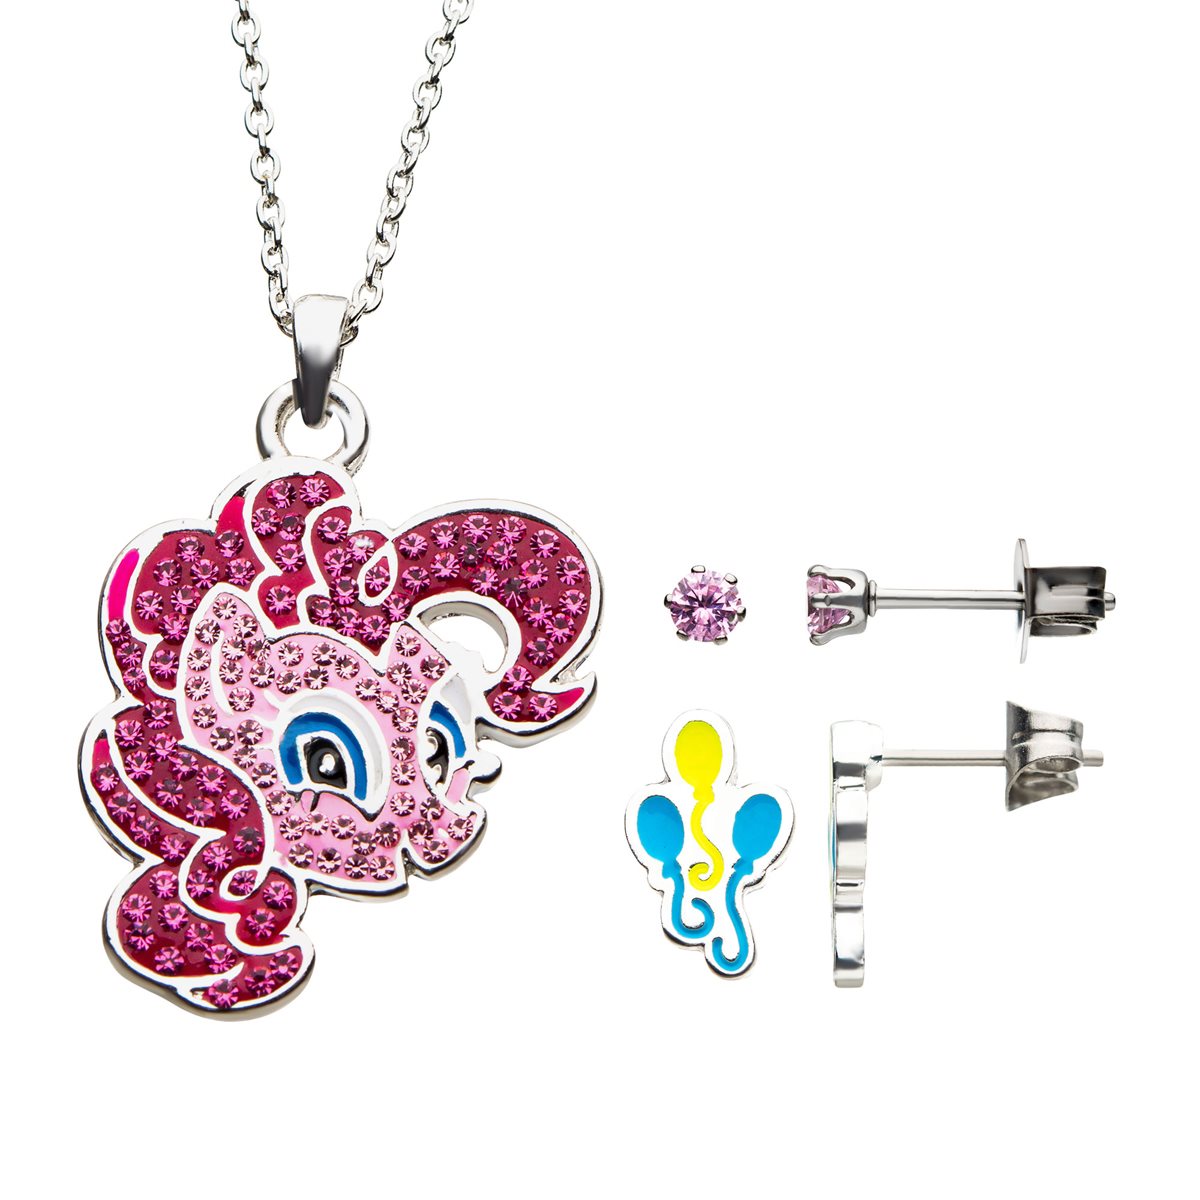 PINKY PIE MY LITTLE PONY PINK LEATHERETT NECKLACE 18 inch 4 TO 6 YEAR GIFT BOXED 